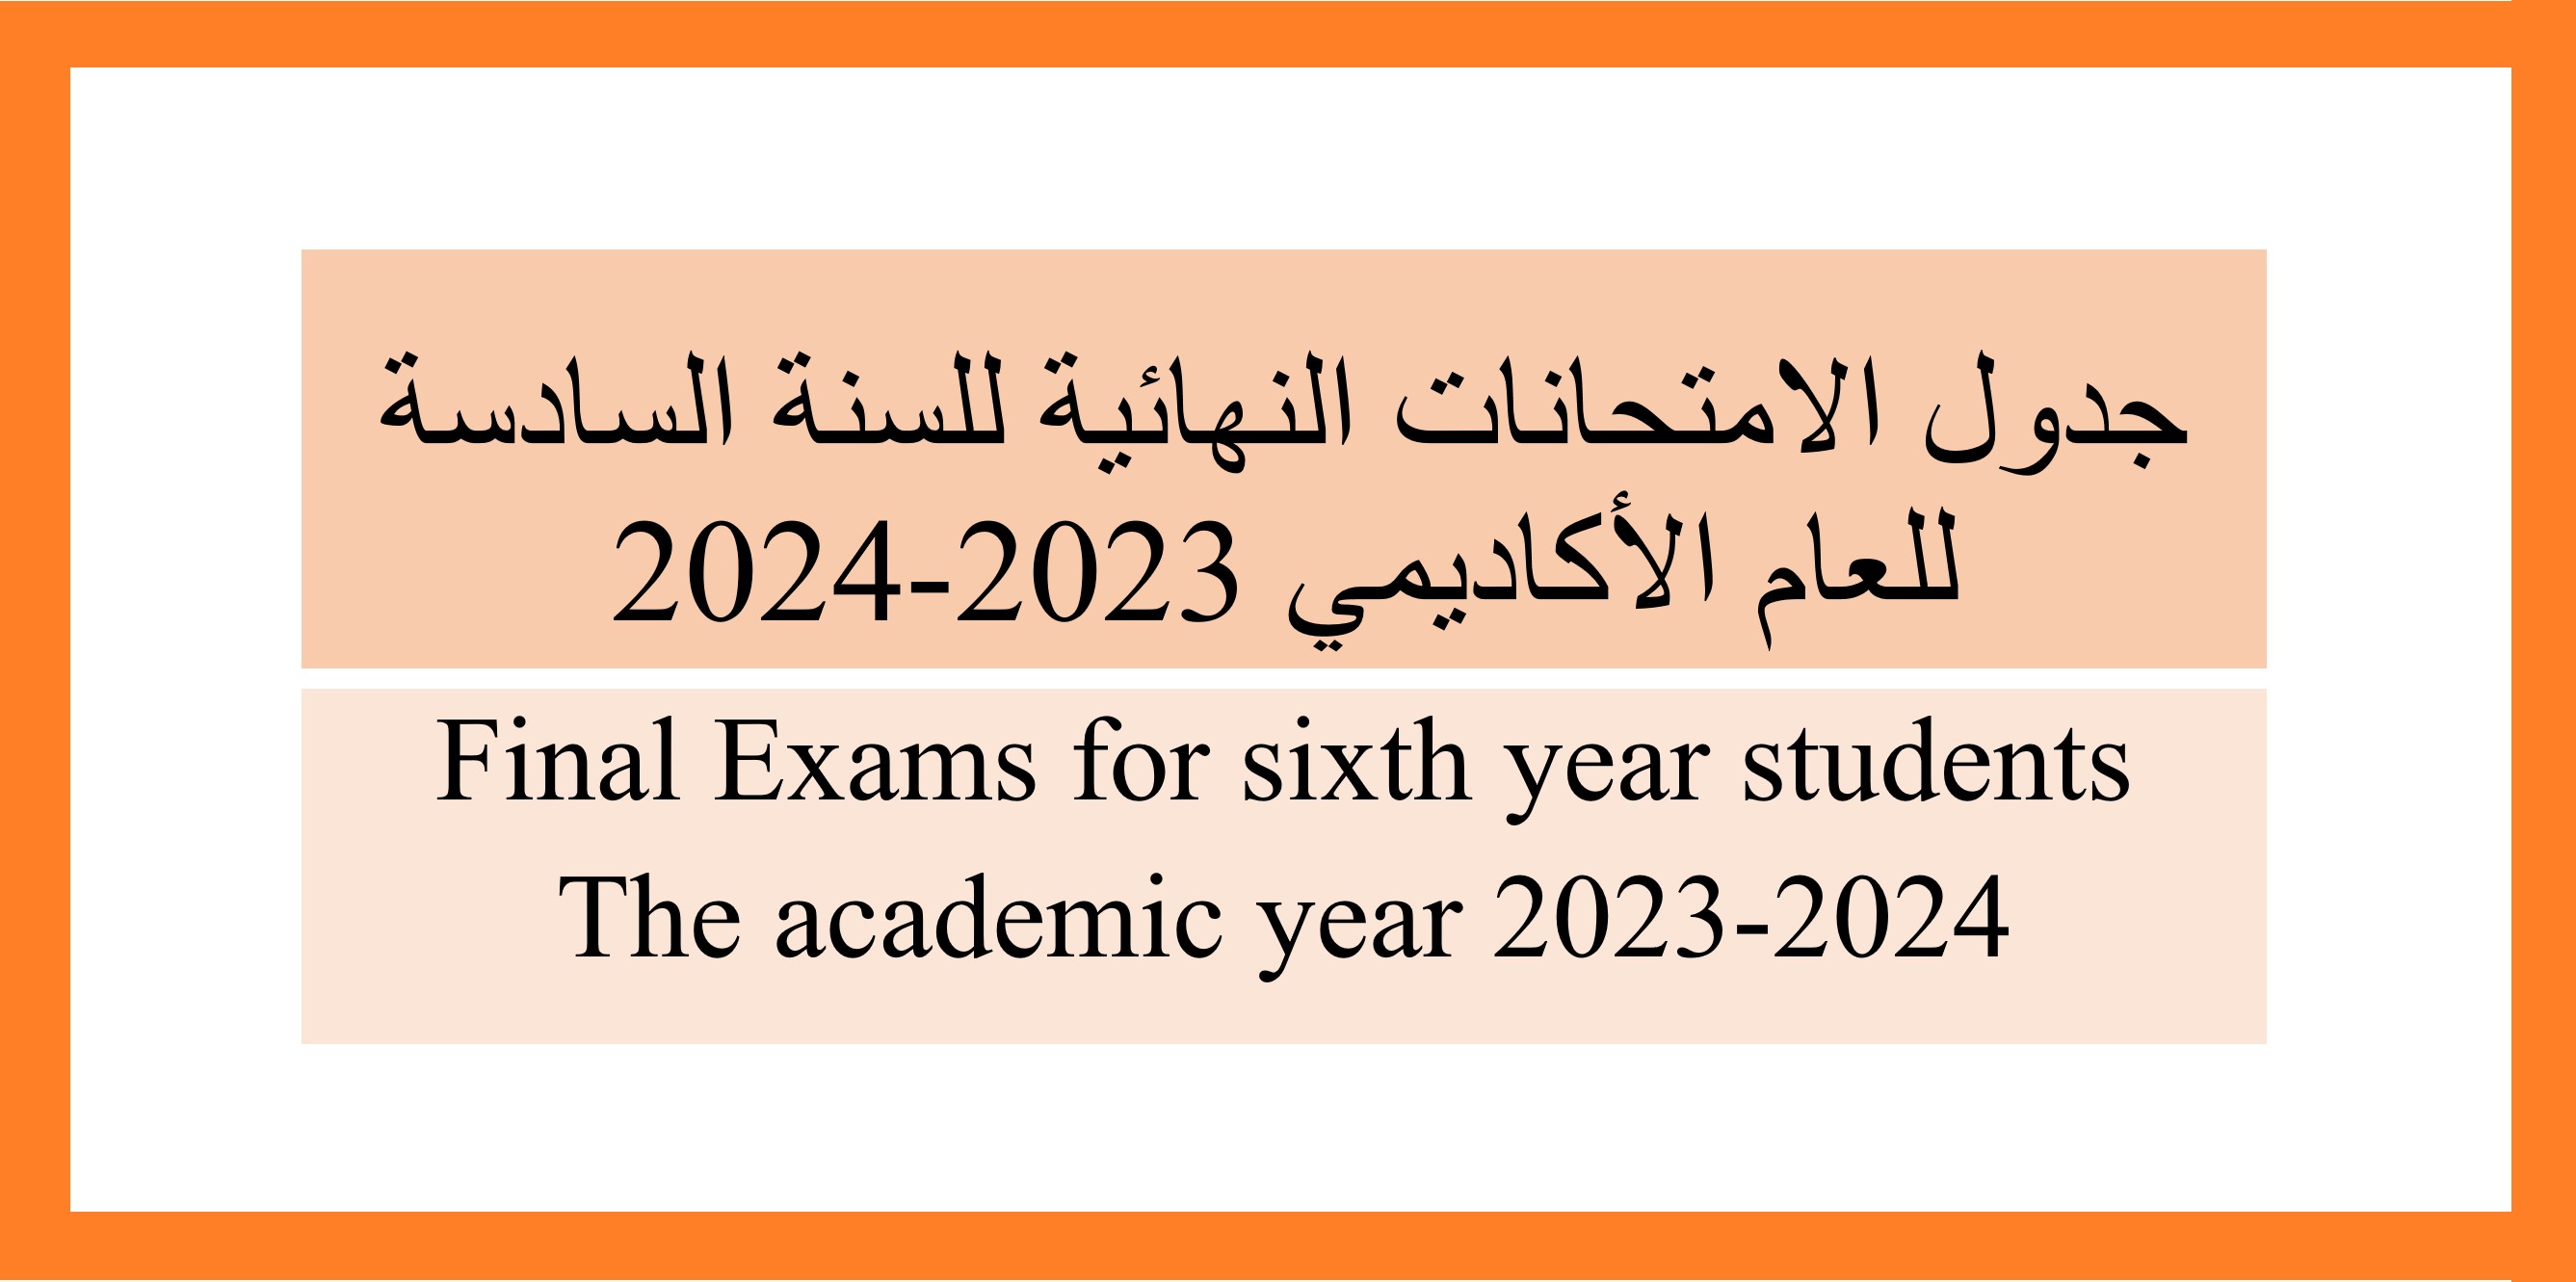 Final Exams for sixth year students The academic year 2023-2024 